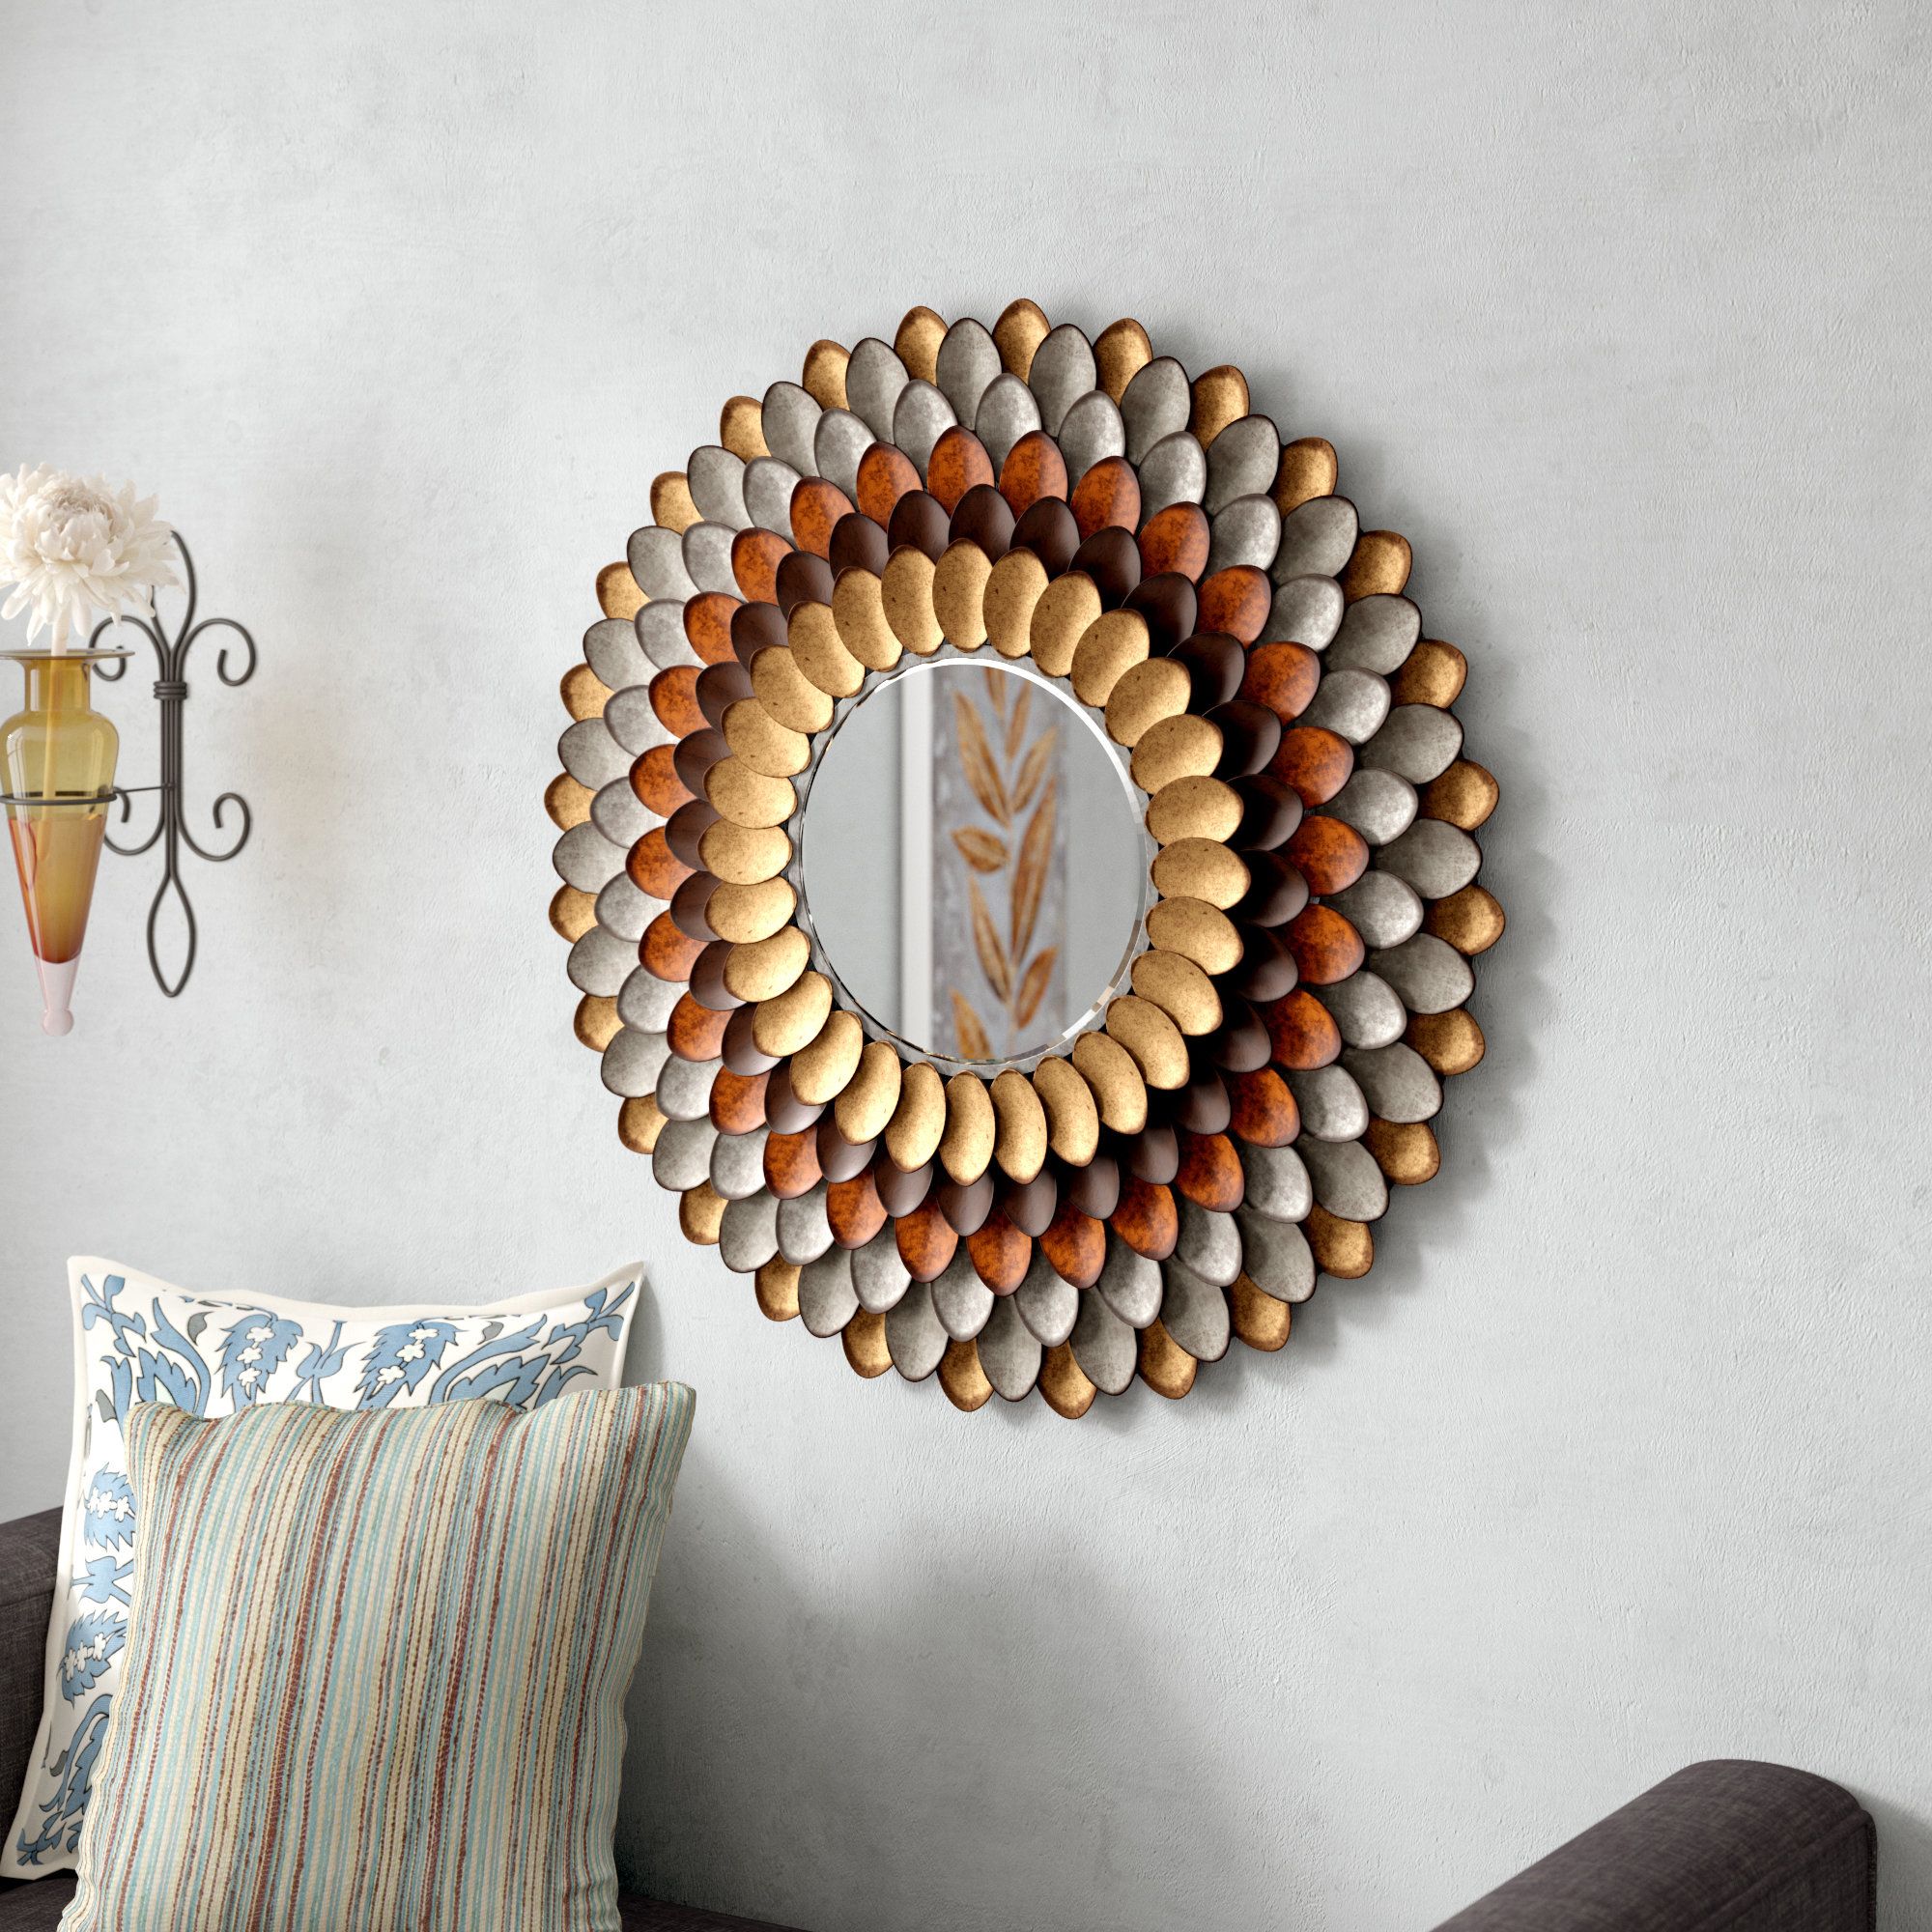 Most Recent Decorative Round Wall Mirrors Intended For Decorative Round Wall Mirror (View 6 of 20)